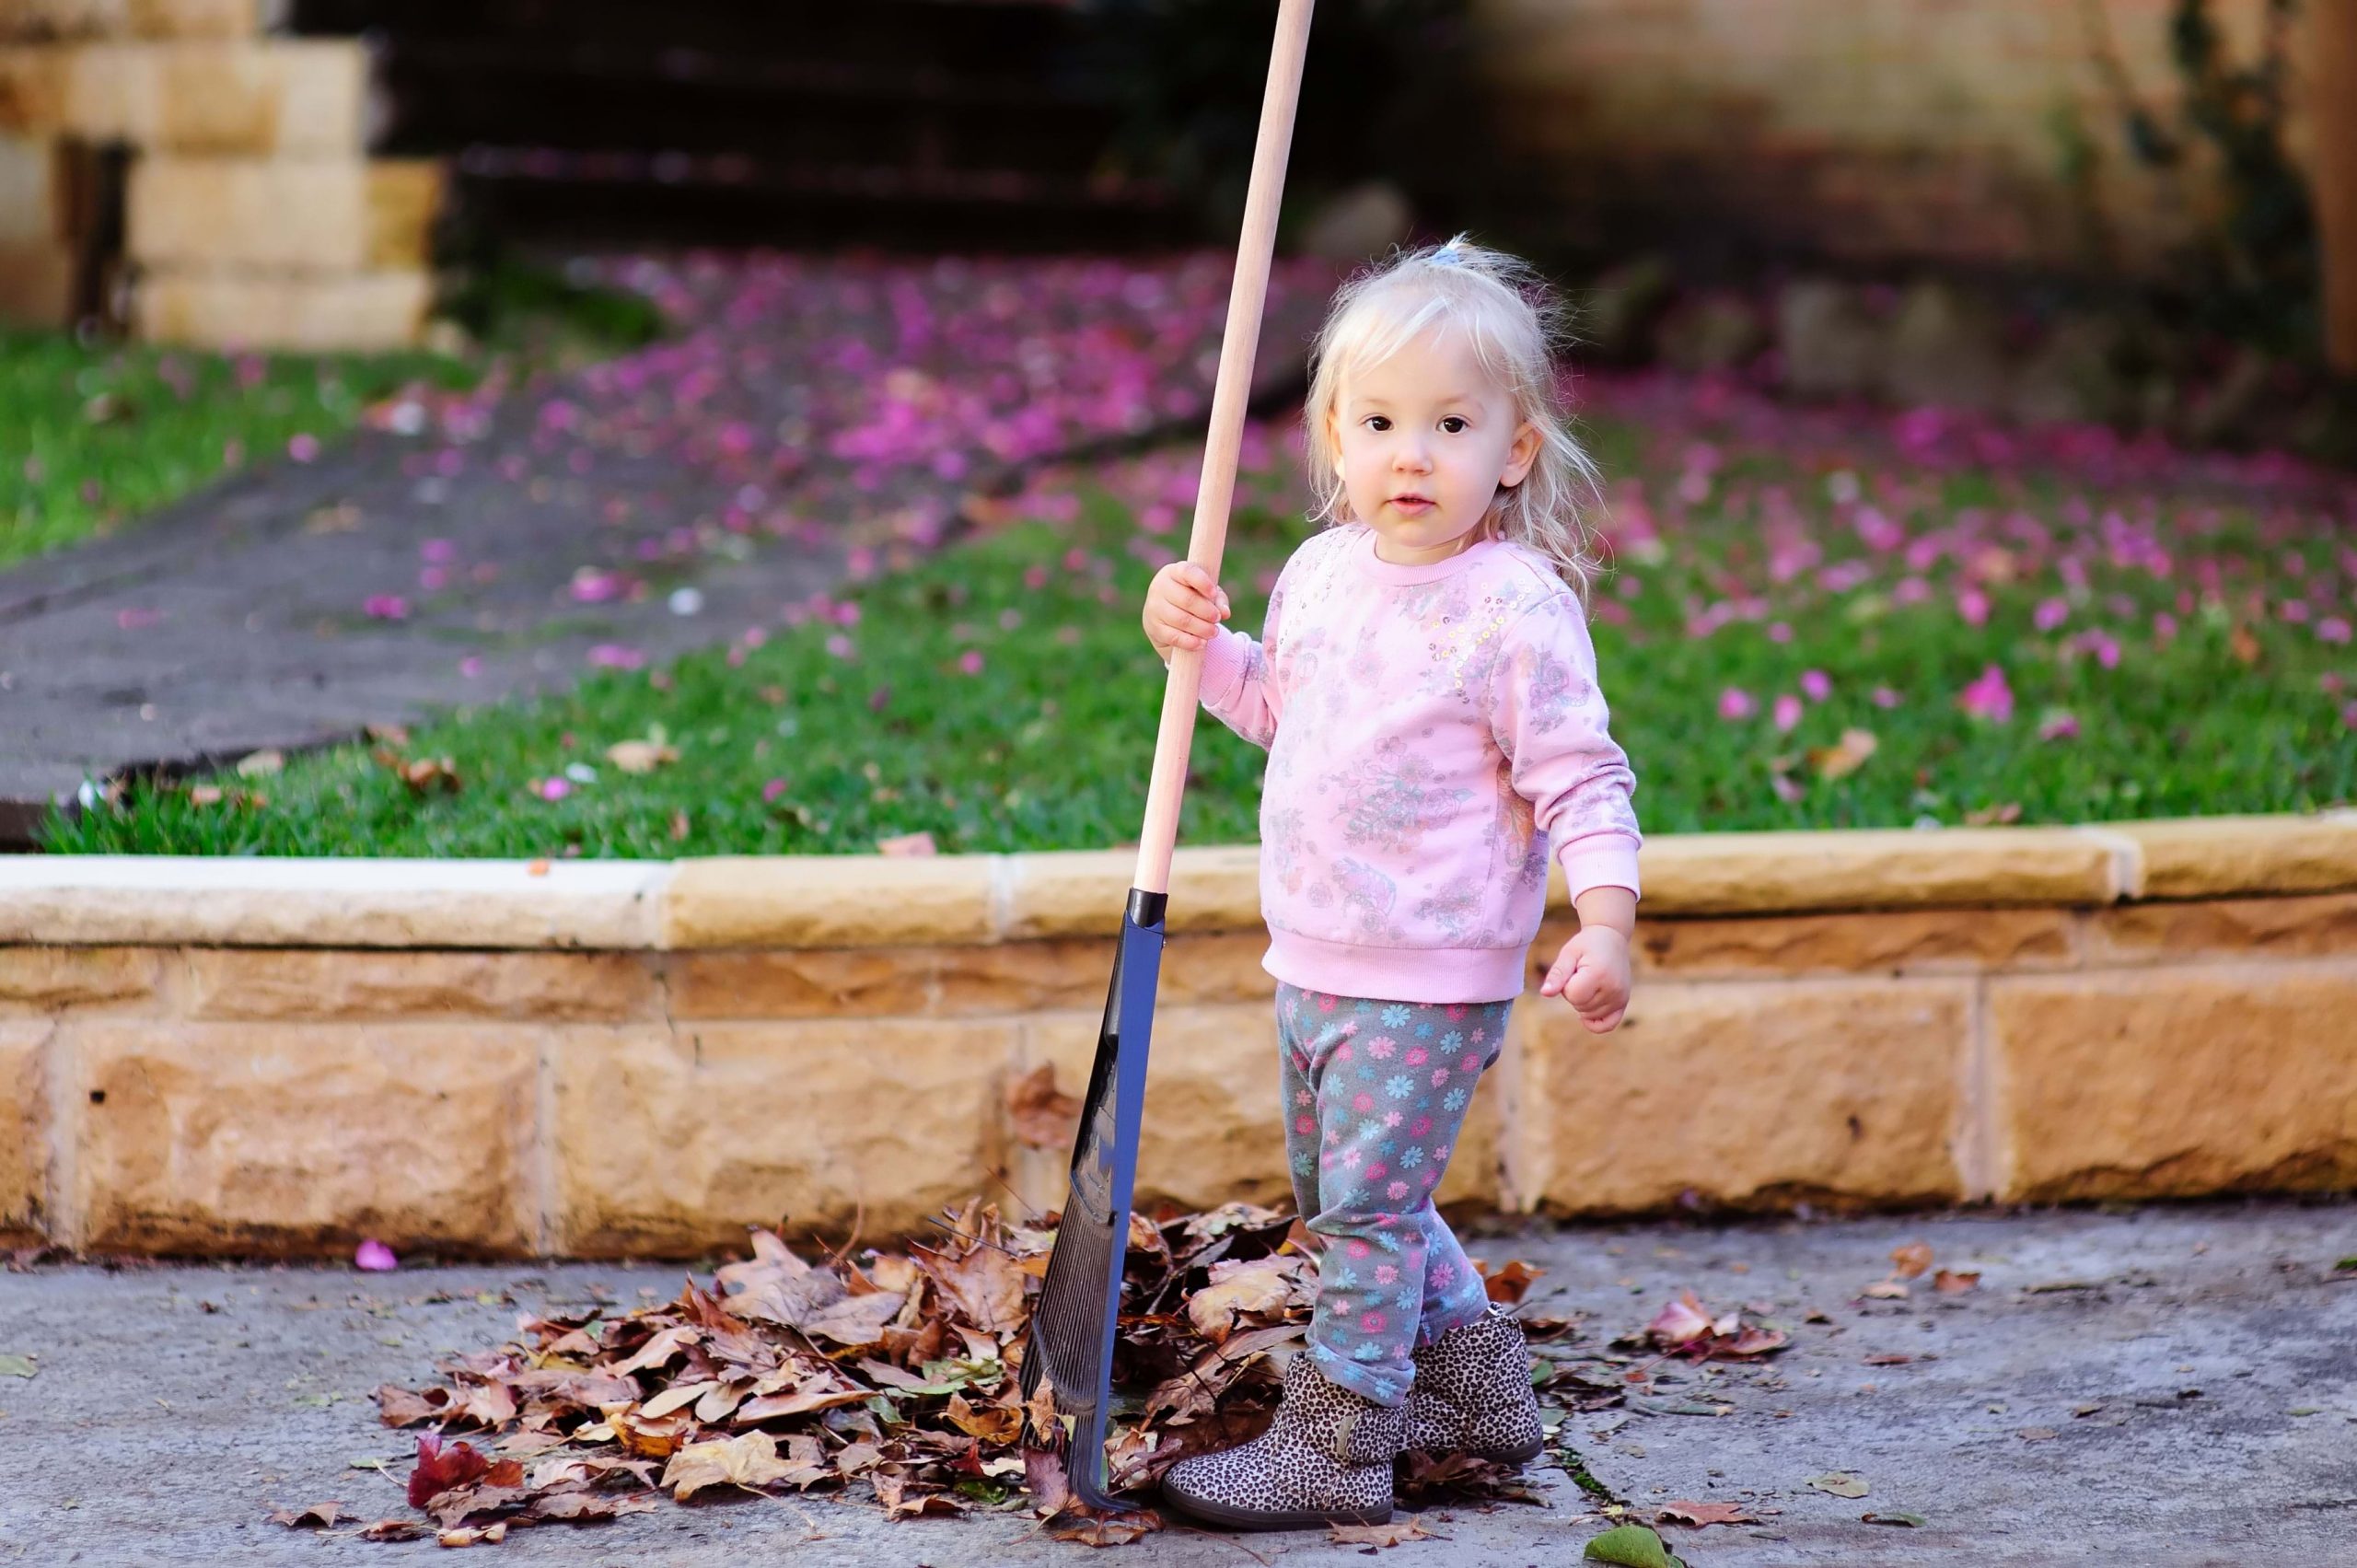 Family activities: Cleaning the yard with your kids